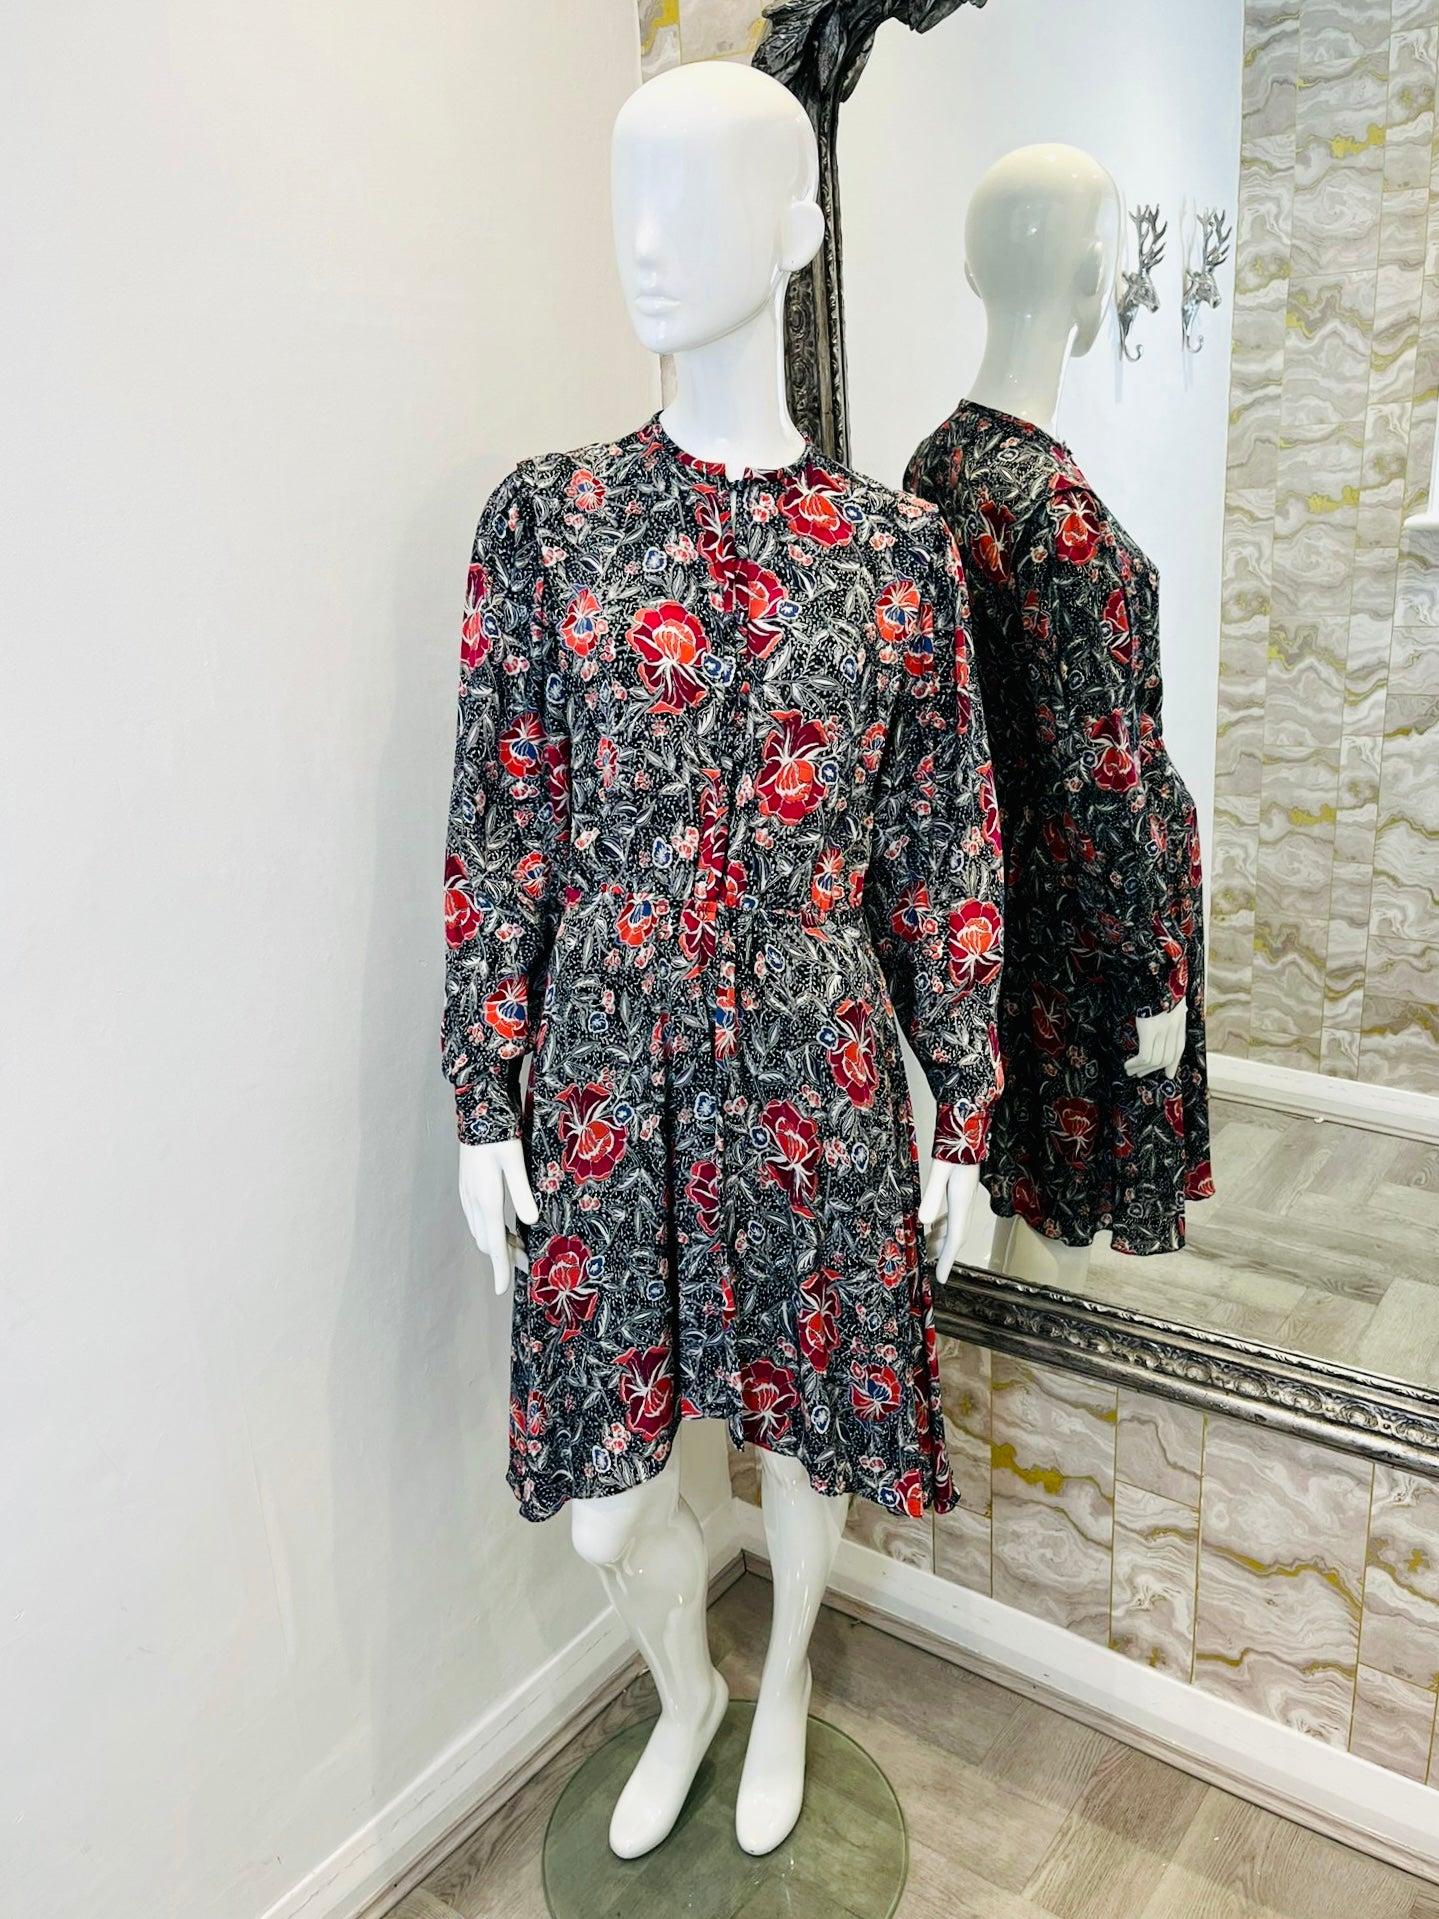 Isabel Marant Etoile Floral Silk Dress

Floral 'Yandra' dress in red and blue flower prints with a monochrome background.

Bohemian style with elasticated waist, flowy hemline and button cuffs.

Size - 38FR

Condition - Excellent

Composition - Silk 